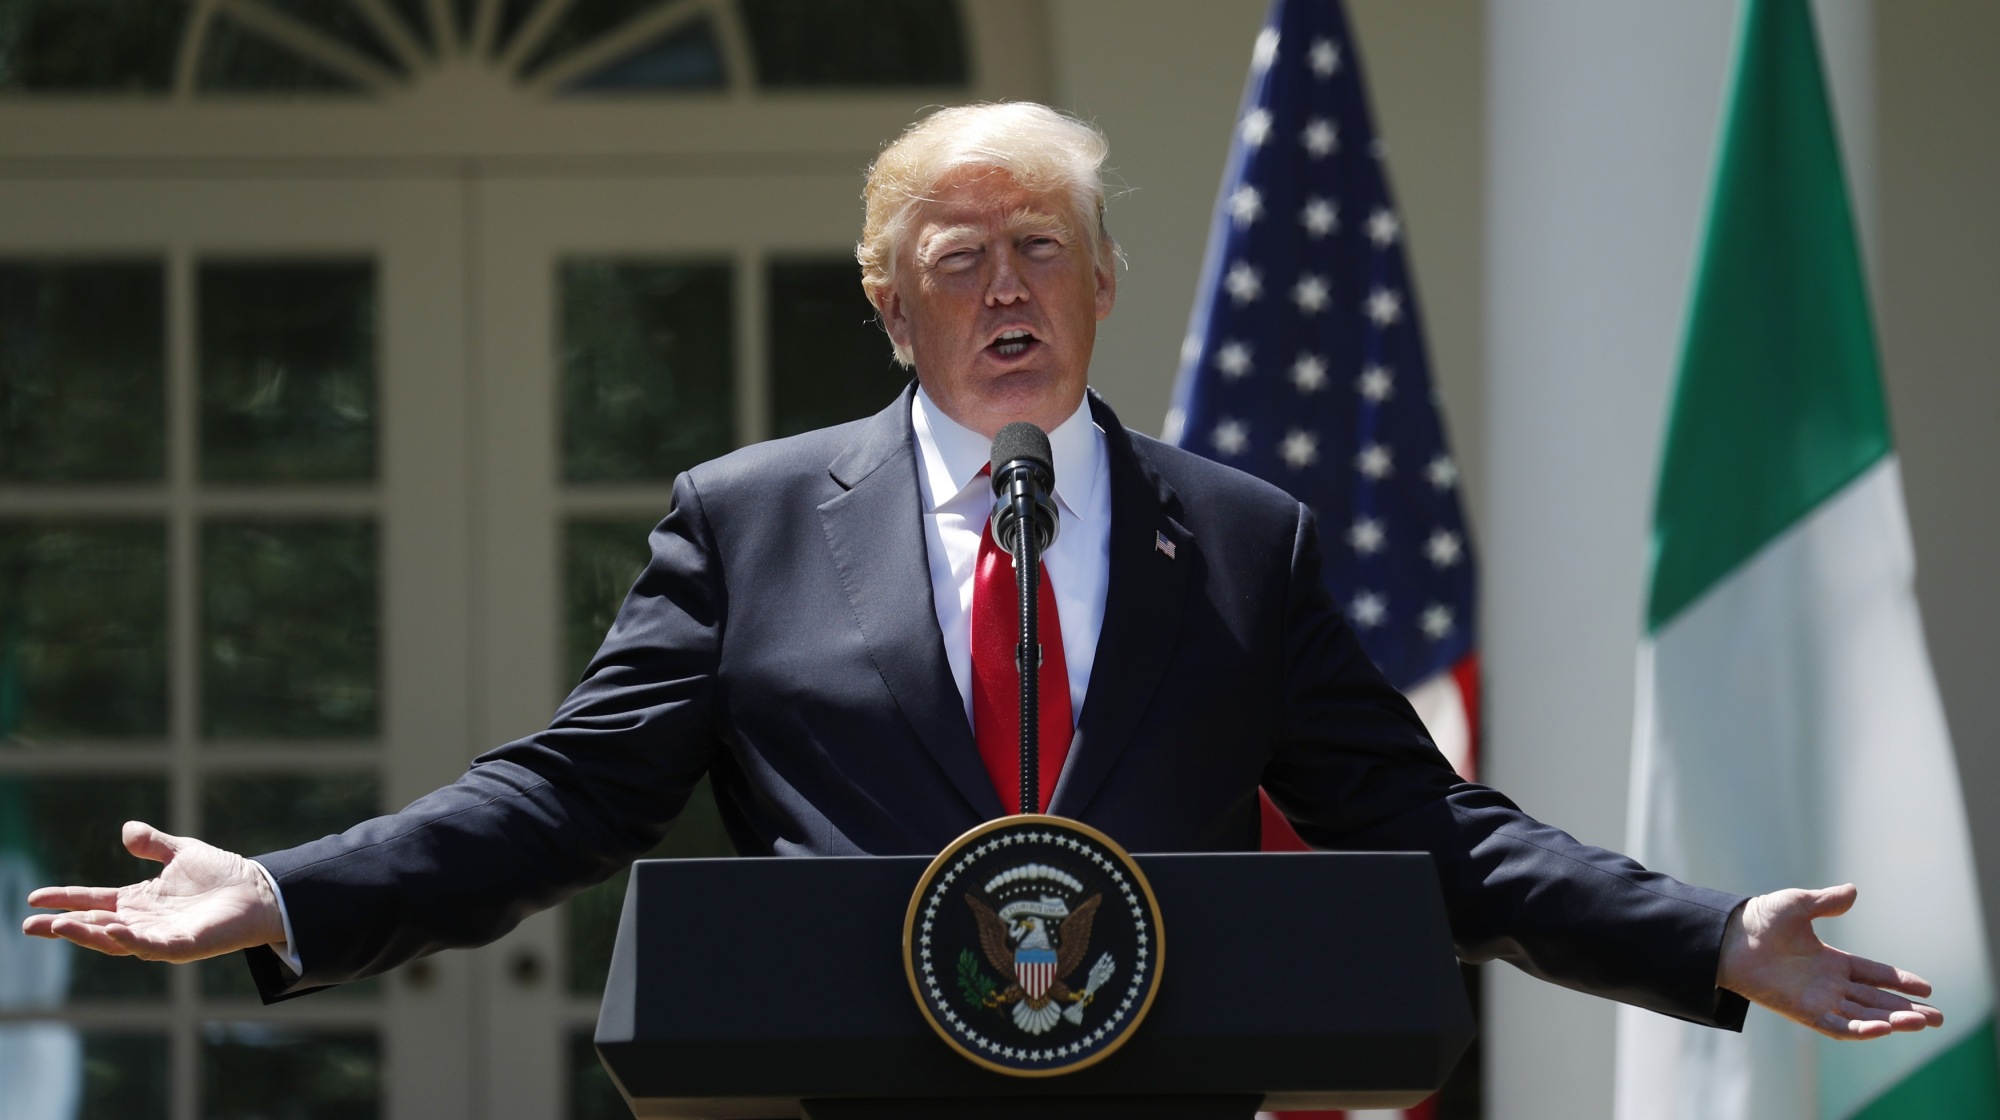 U.S. President Donald Trump addresses a joint news conference with Nigerian President Muhammadu Buhari in the Rose Garden of the White House in Washington on Monday. | REUTERS